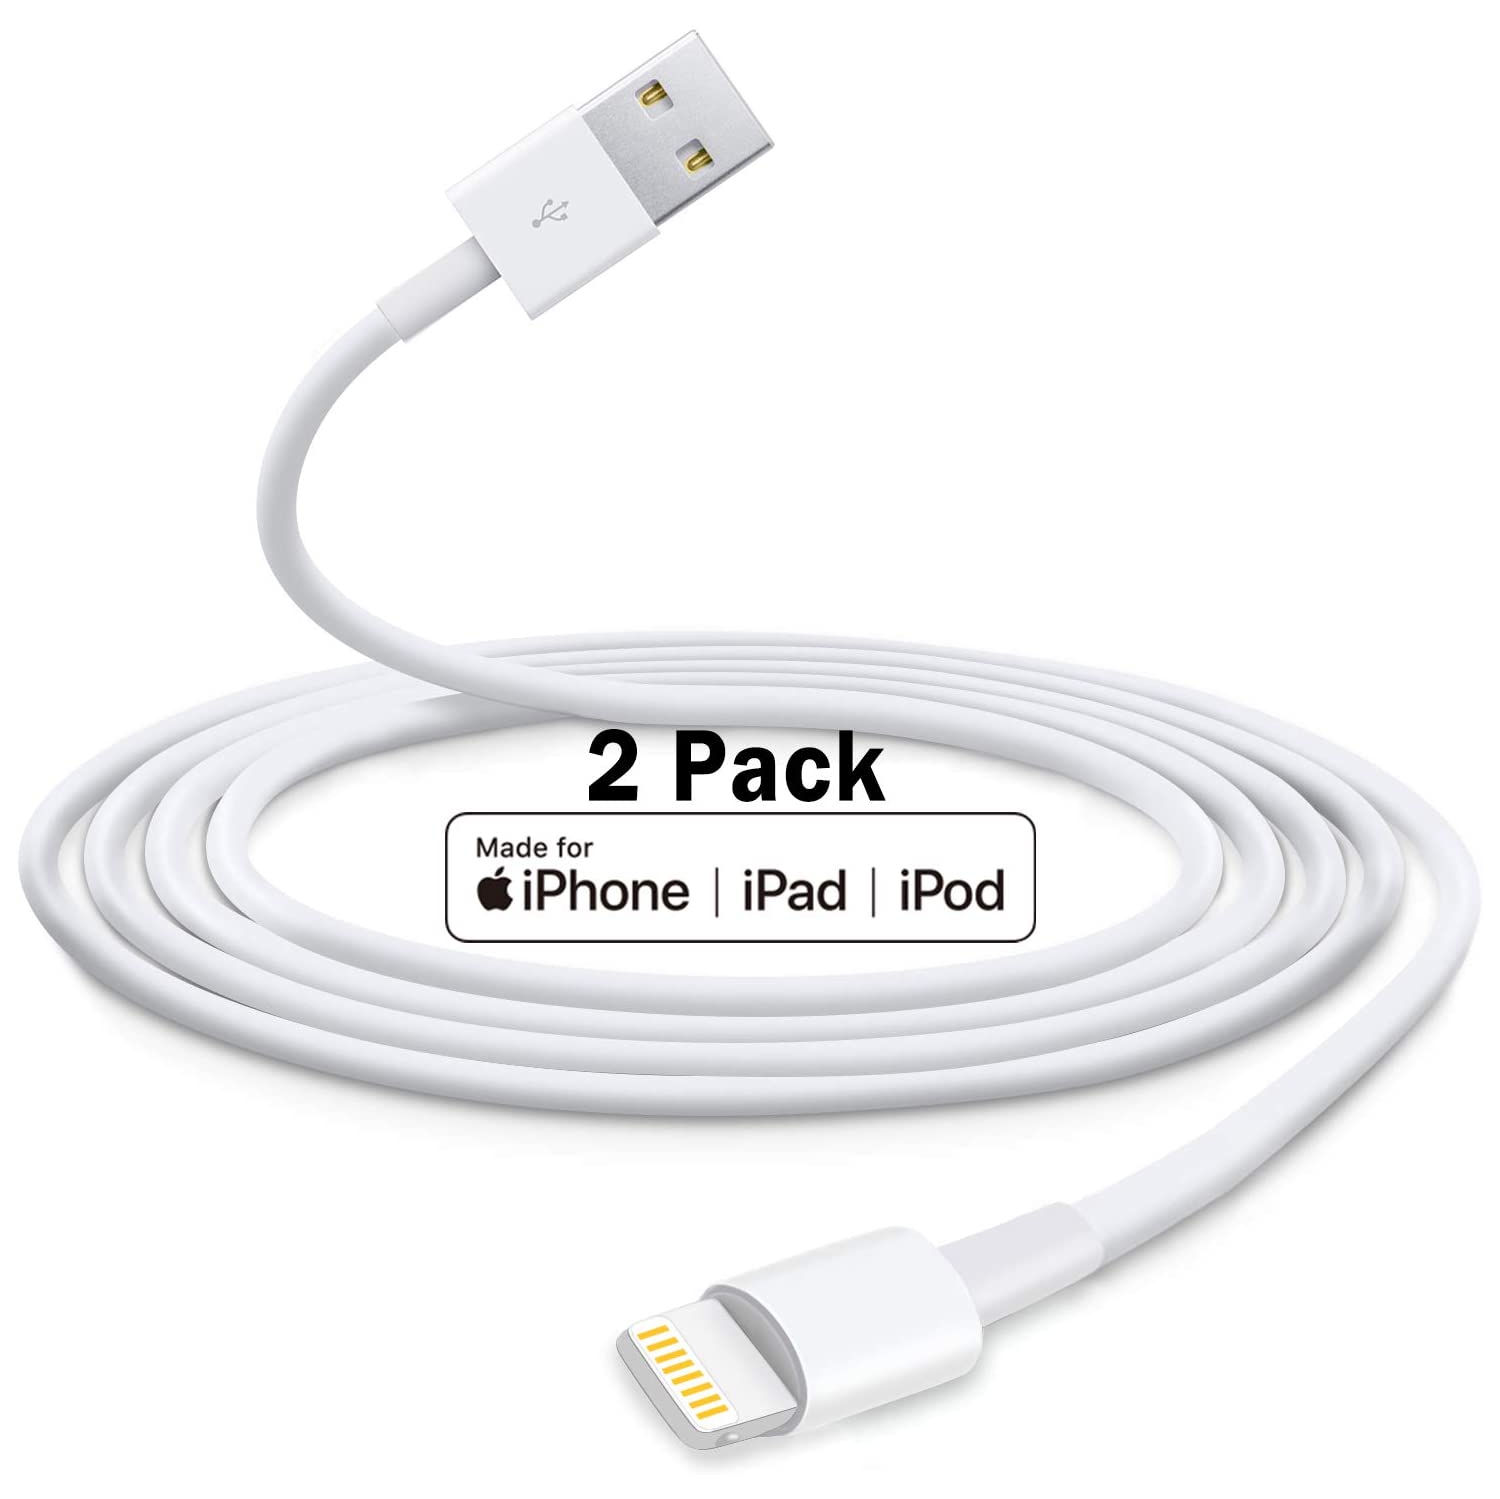 (2PK)[Apple MFi Certified] iPhone/iPad Charging/Charger Cord Lightening to USB Cable Fast Charging and Syncing for iPads,iPods and iPhone X/8/7/6s/6/plus/5s/5c/SE (FREE SHIPPING)